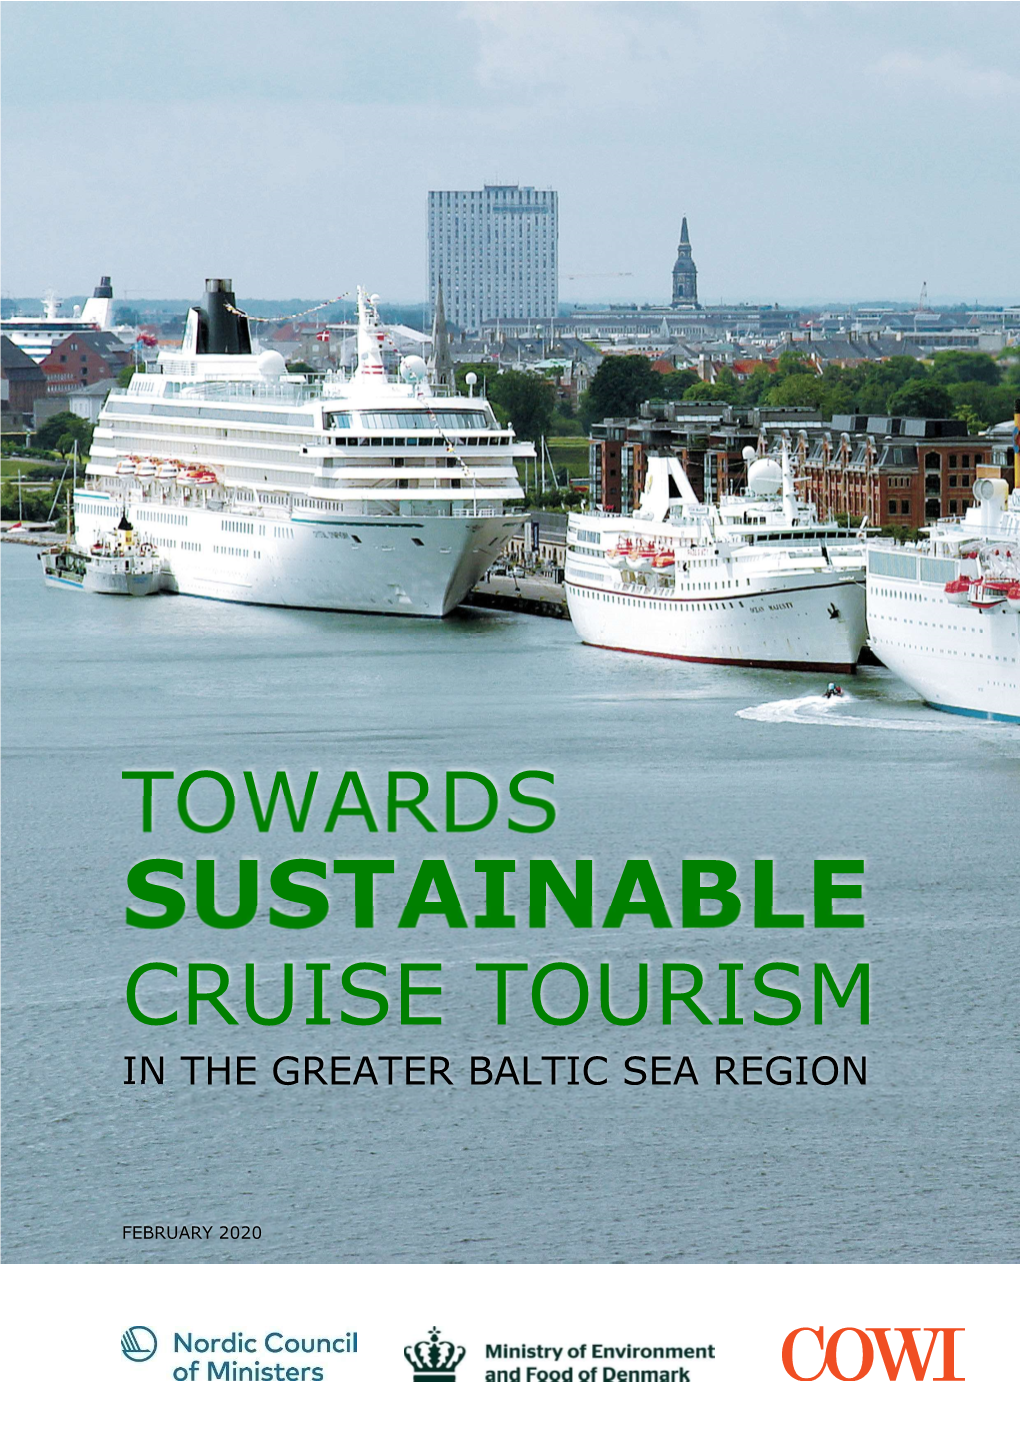 Sustainable Cruise Tourism in the Greater Baltic Sea Region